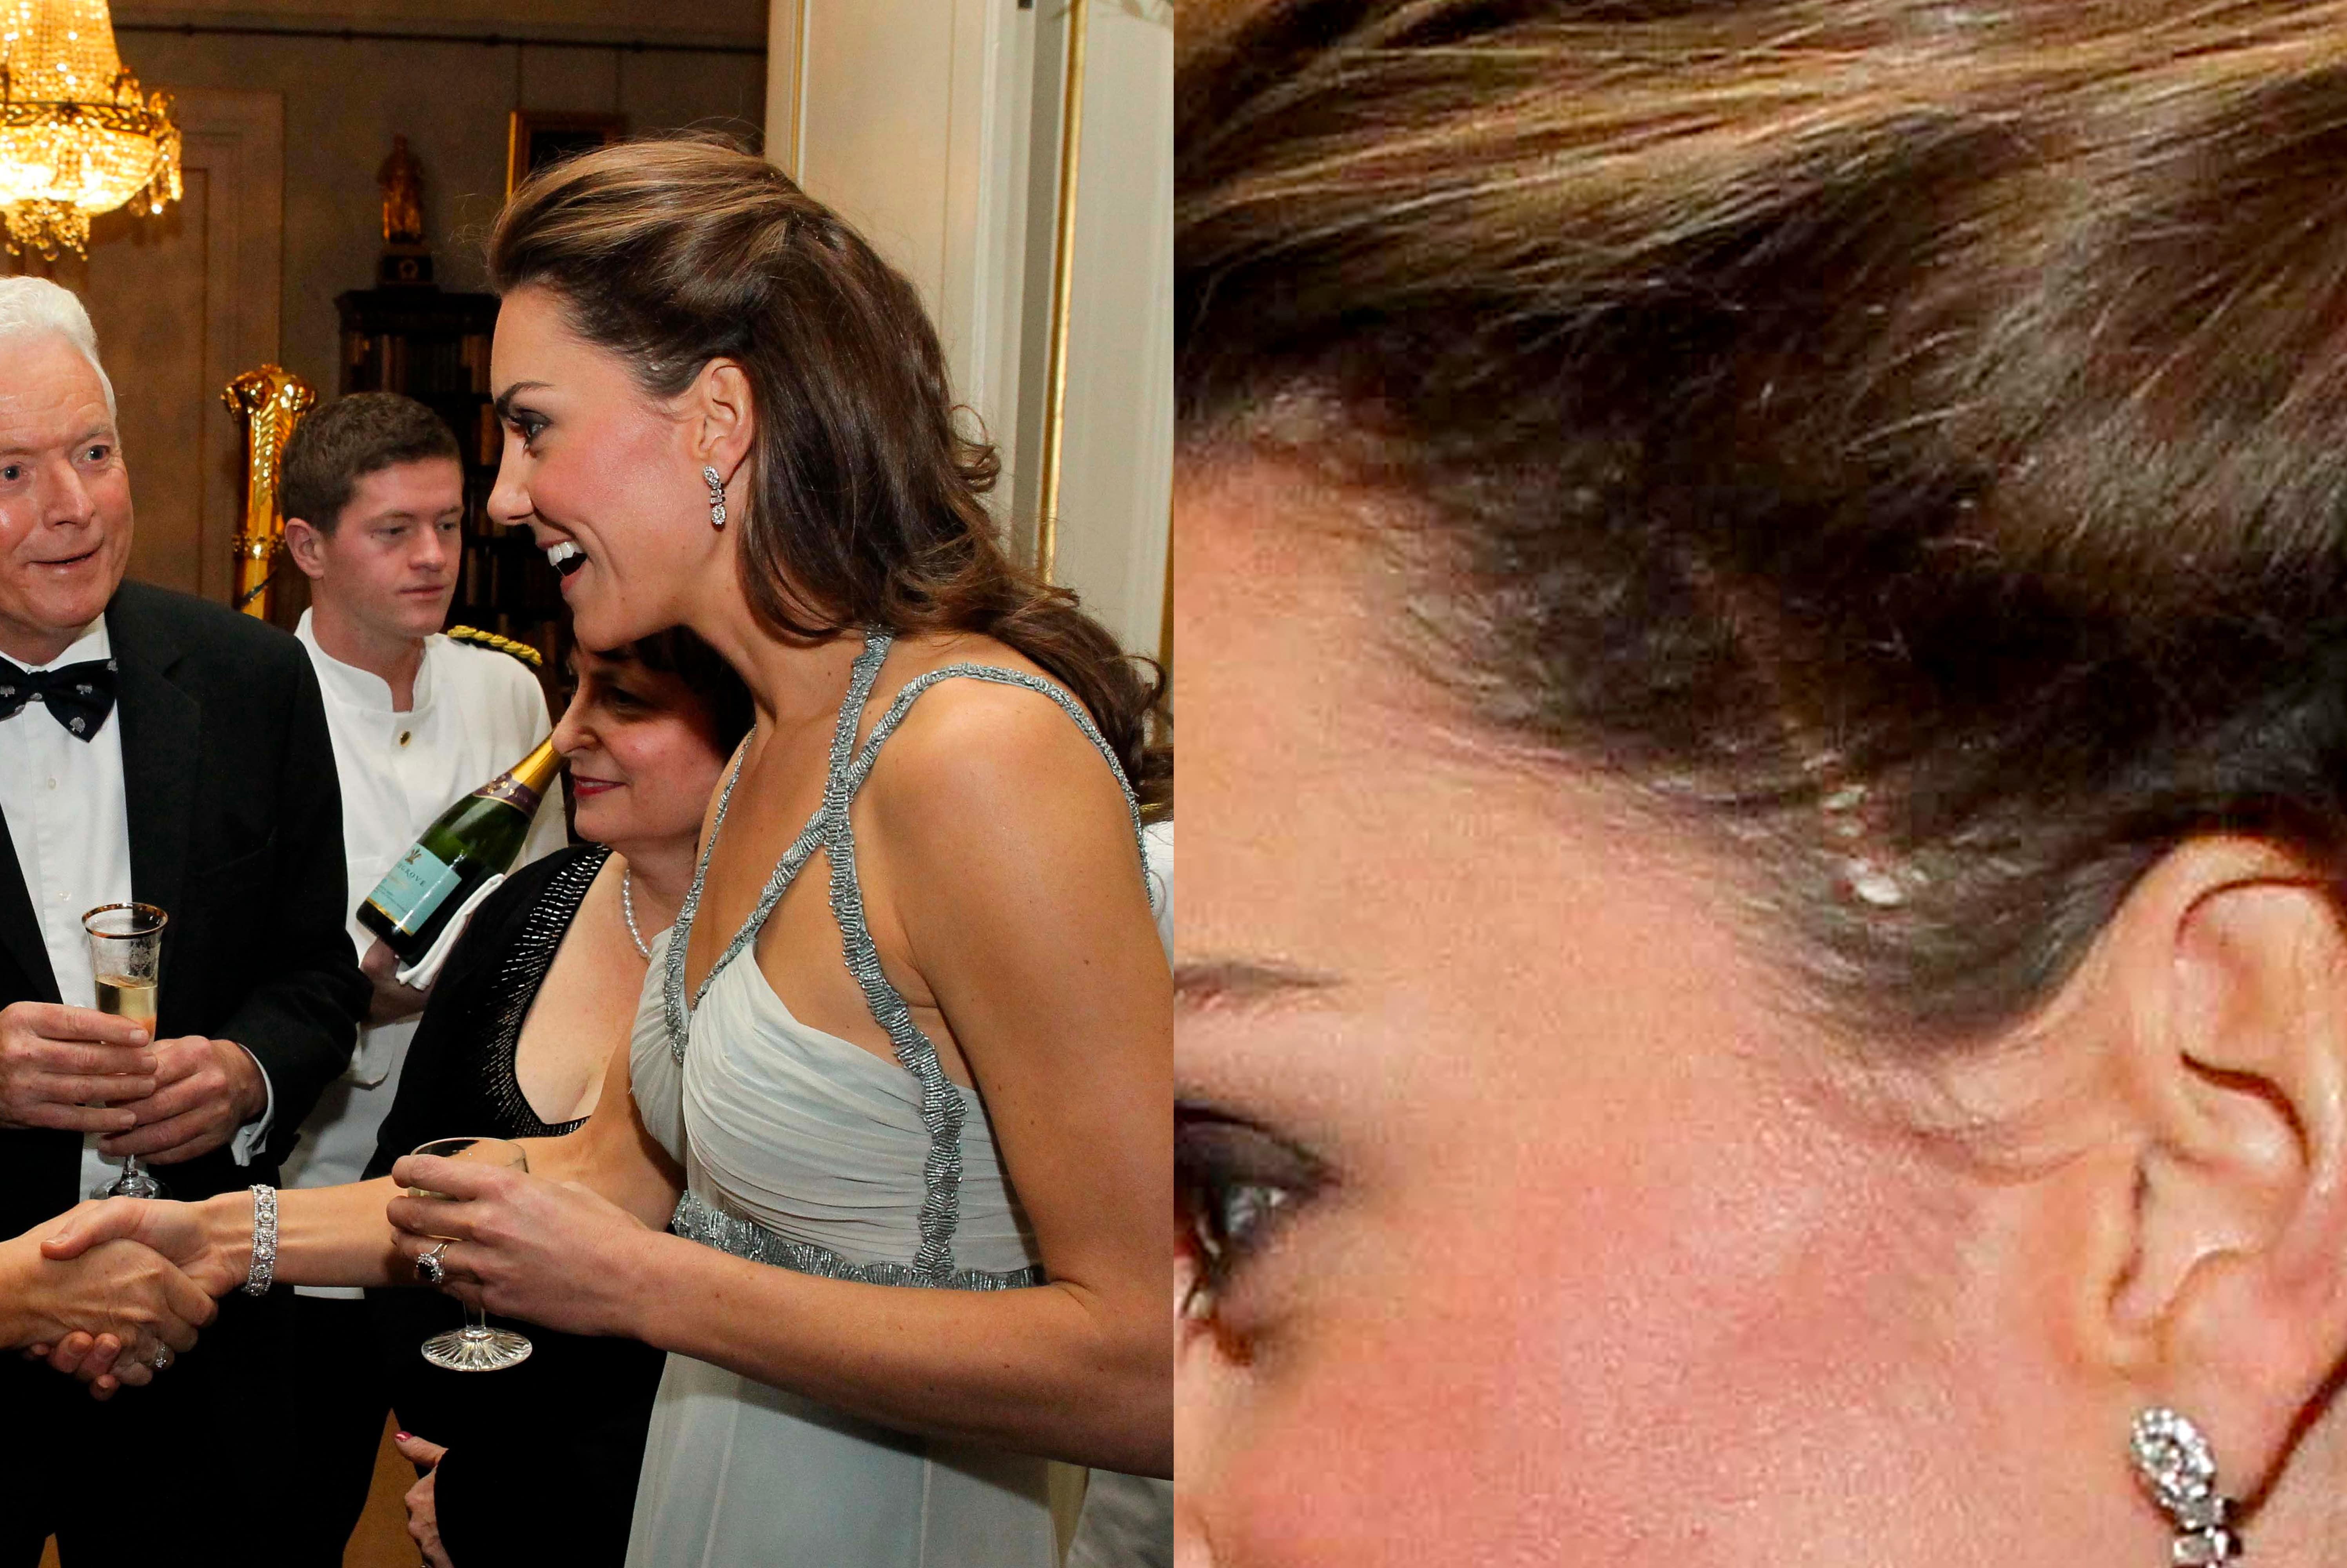 Kate Middleton speaks to guests at an event in support of the "In Kind Direct" charity at Clarence House on October 26, 2011 in London, England. | Source: Getty Images